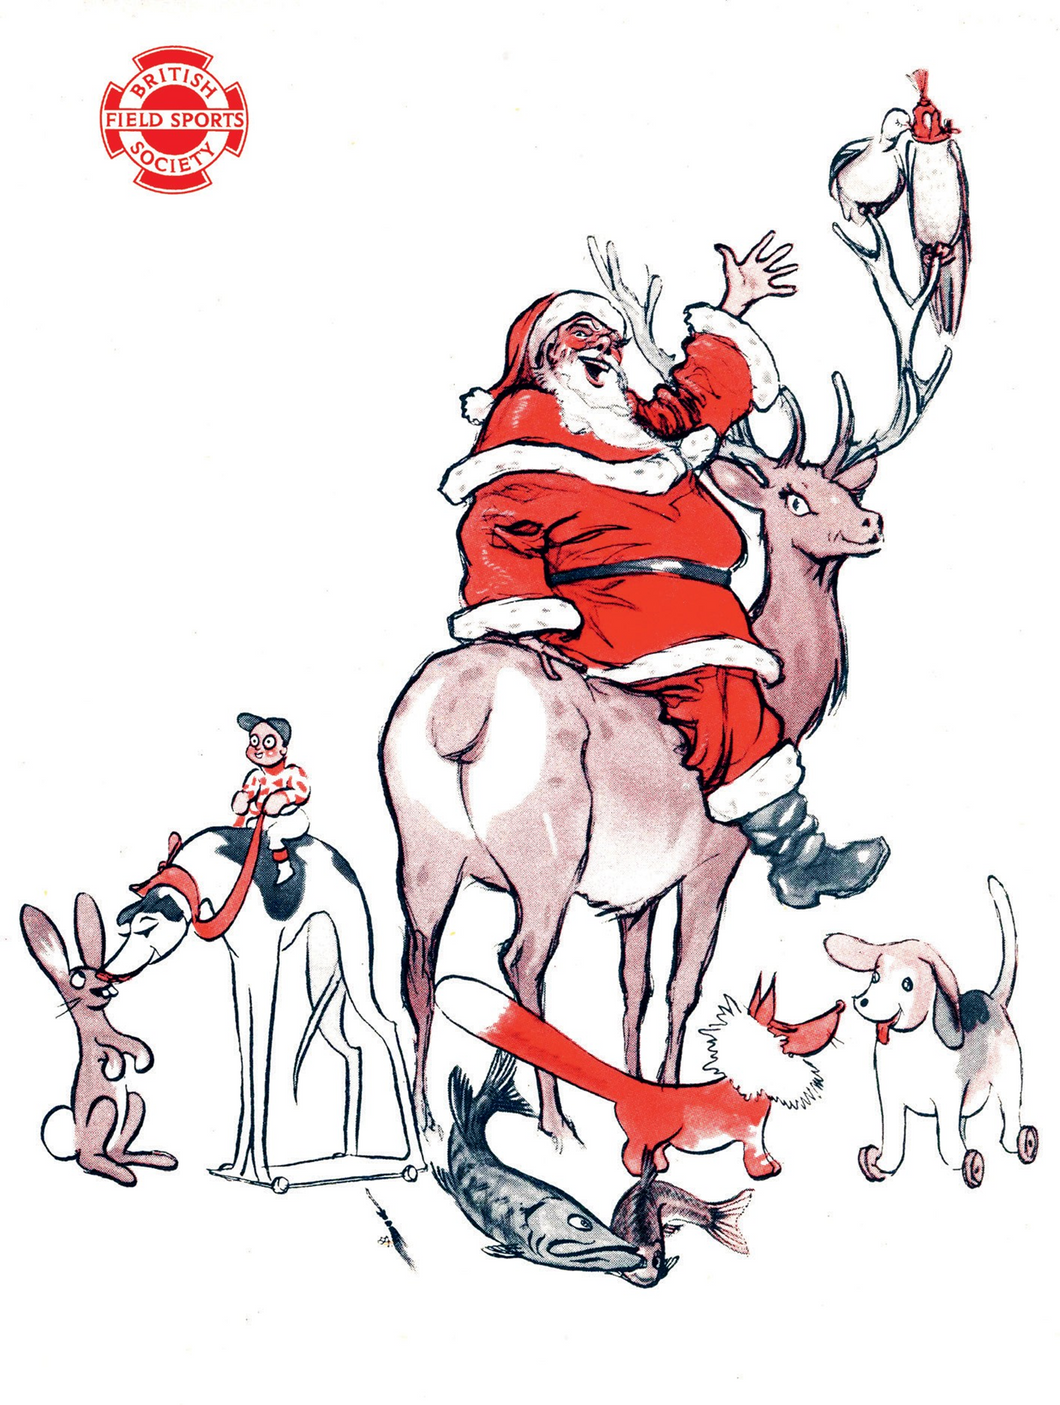 1954 Christmas Card Illustration for the British Fieldsports Society (Pack of 10 Cards)